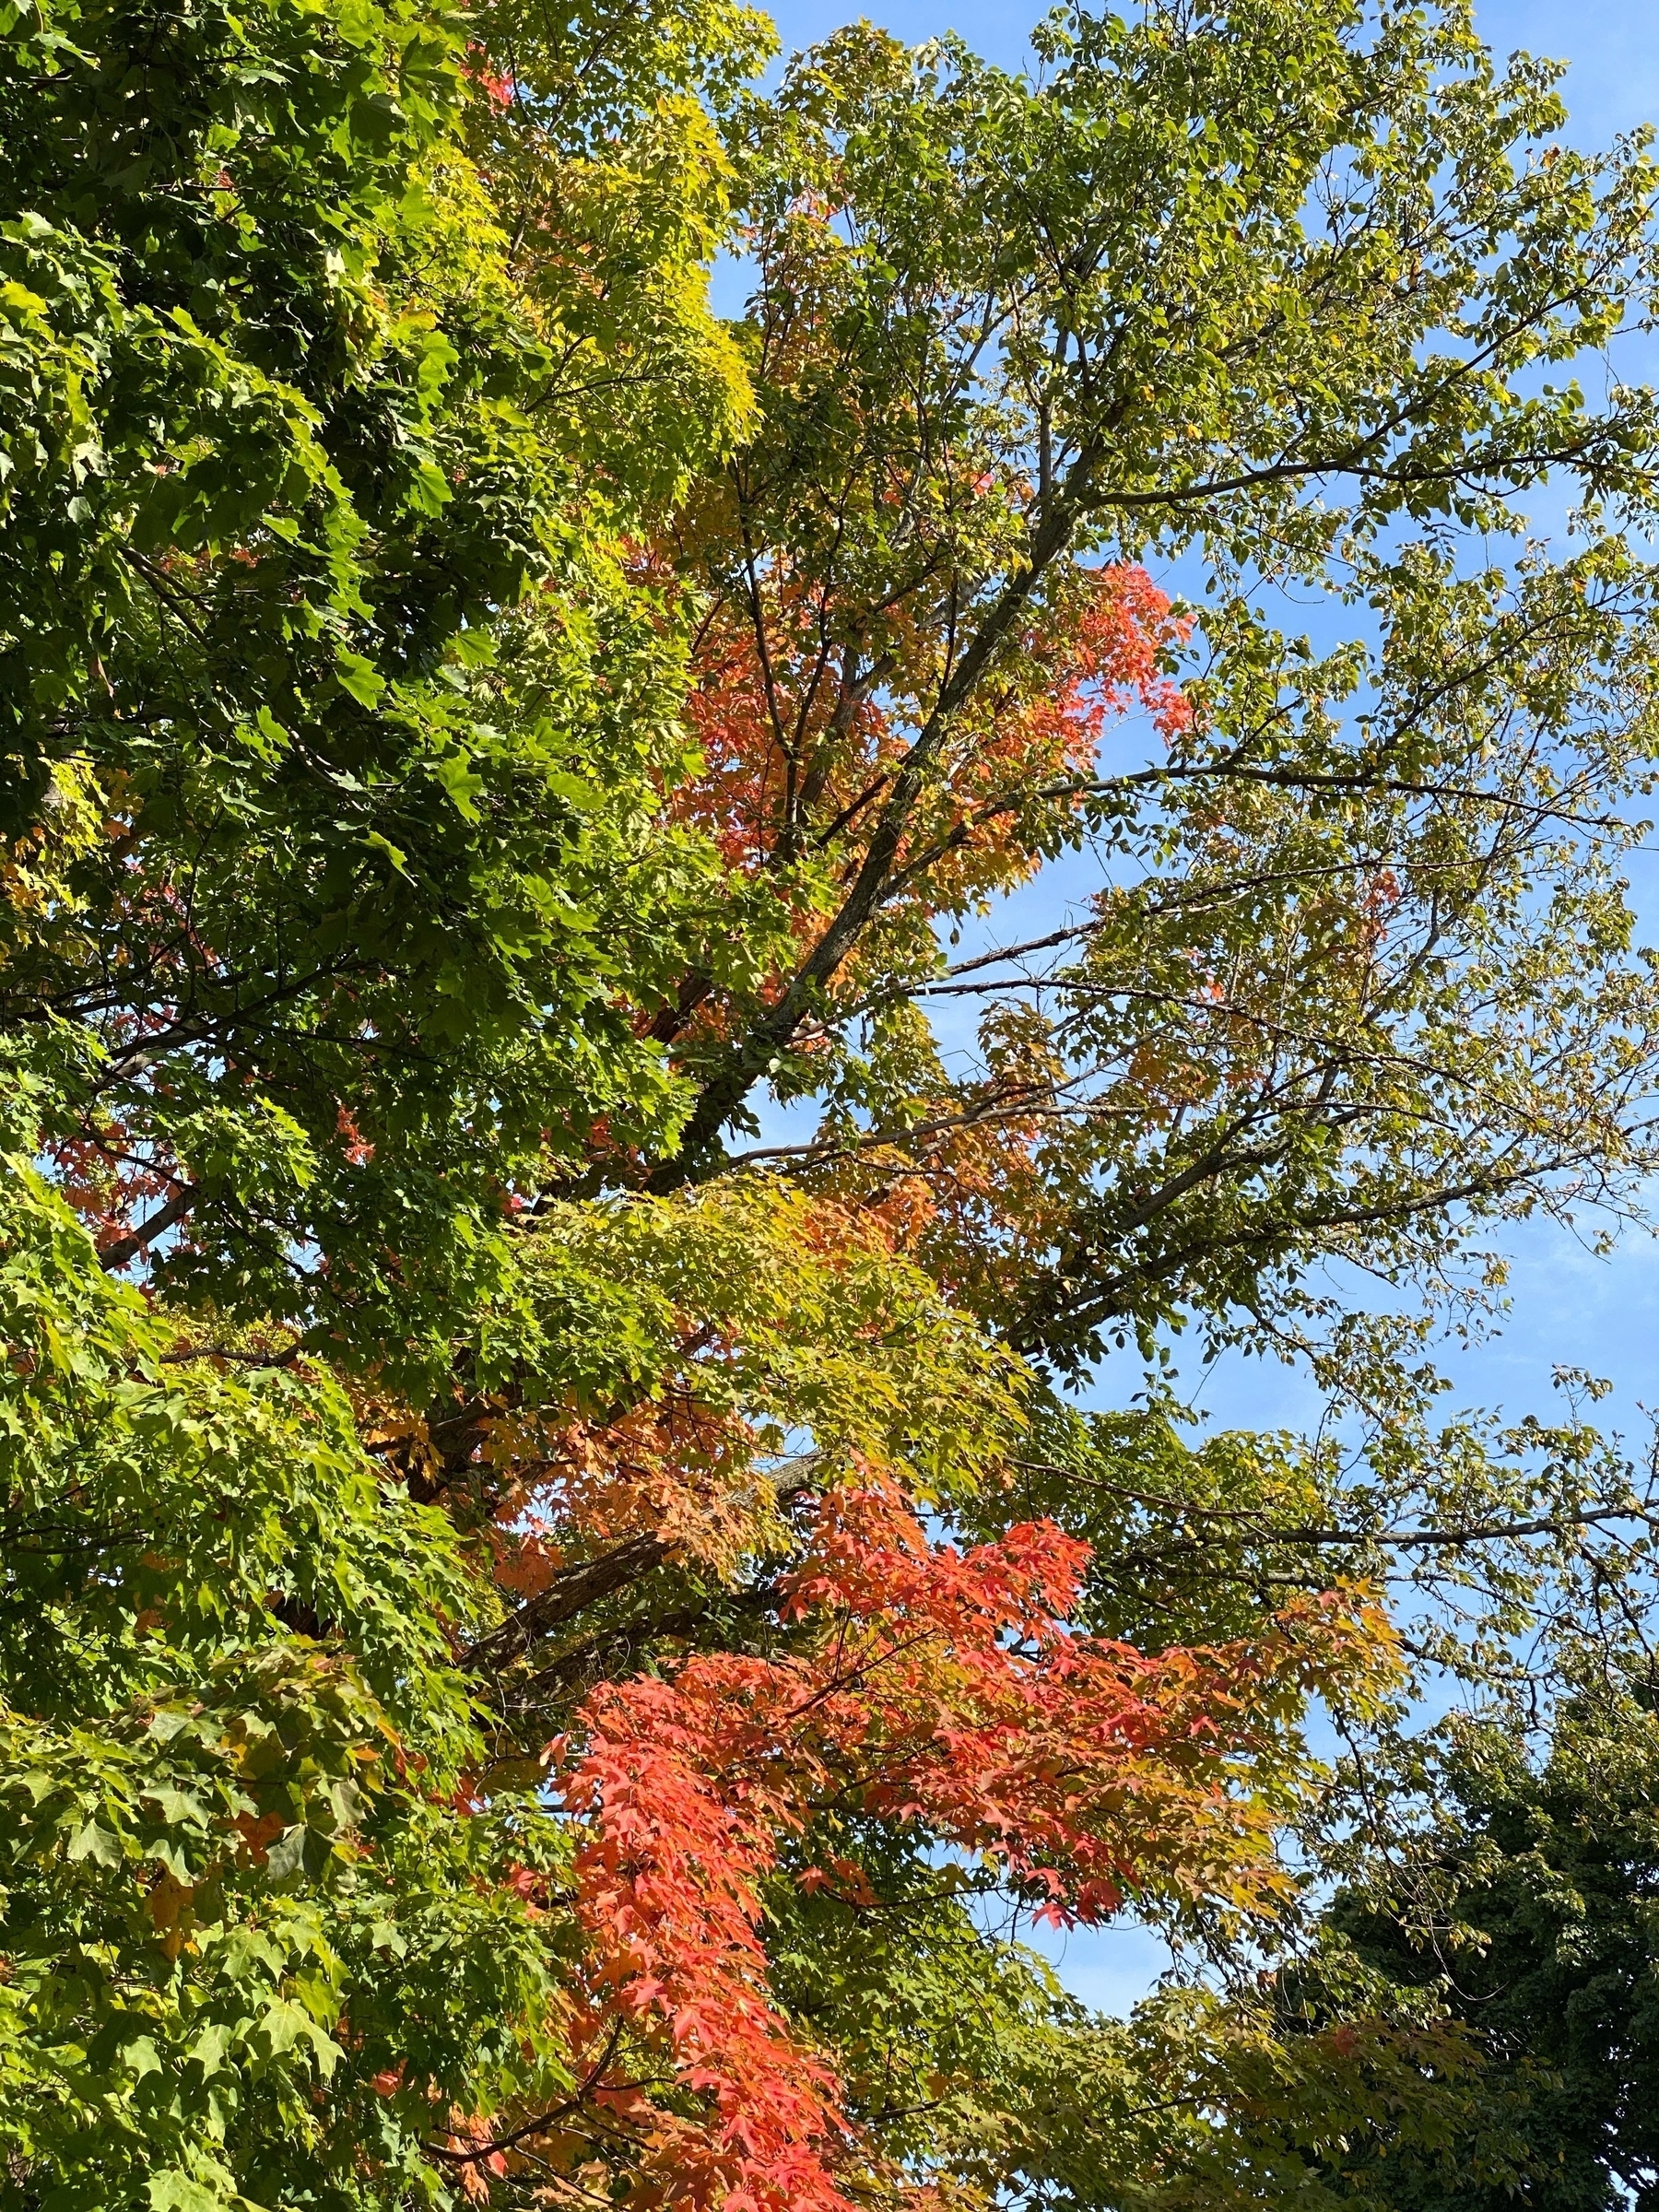 View of tree branches mostly covered in green leaves, but with a few bright red sections in the middle.